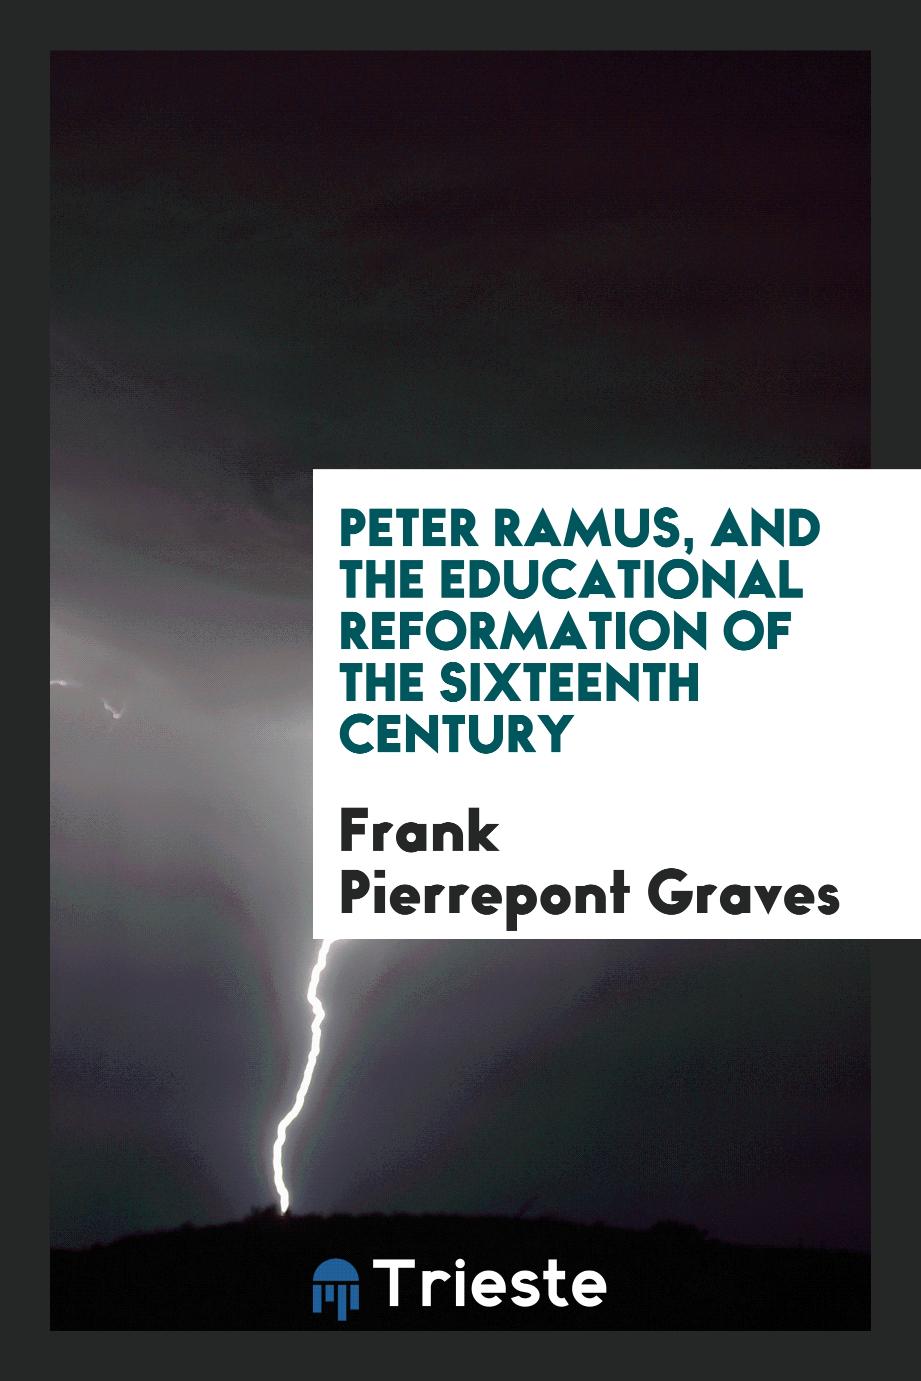 Peter Ramus, and the educational reformation of the sixteenth century